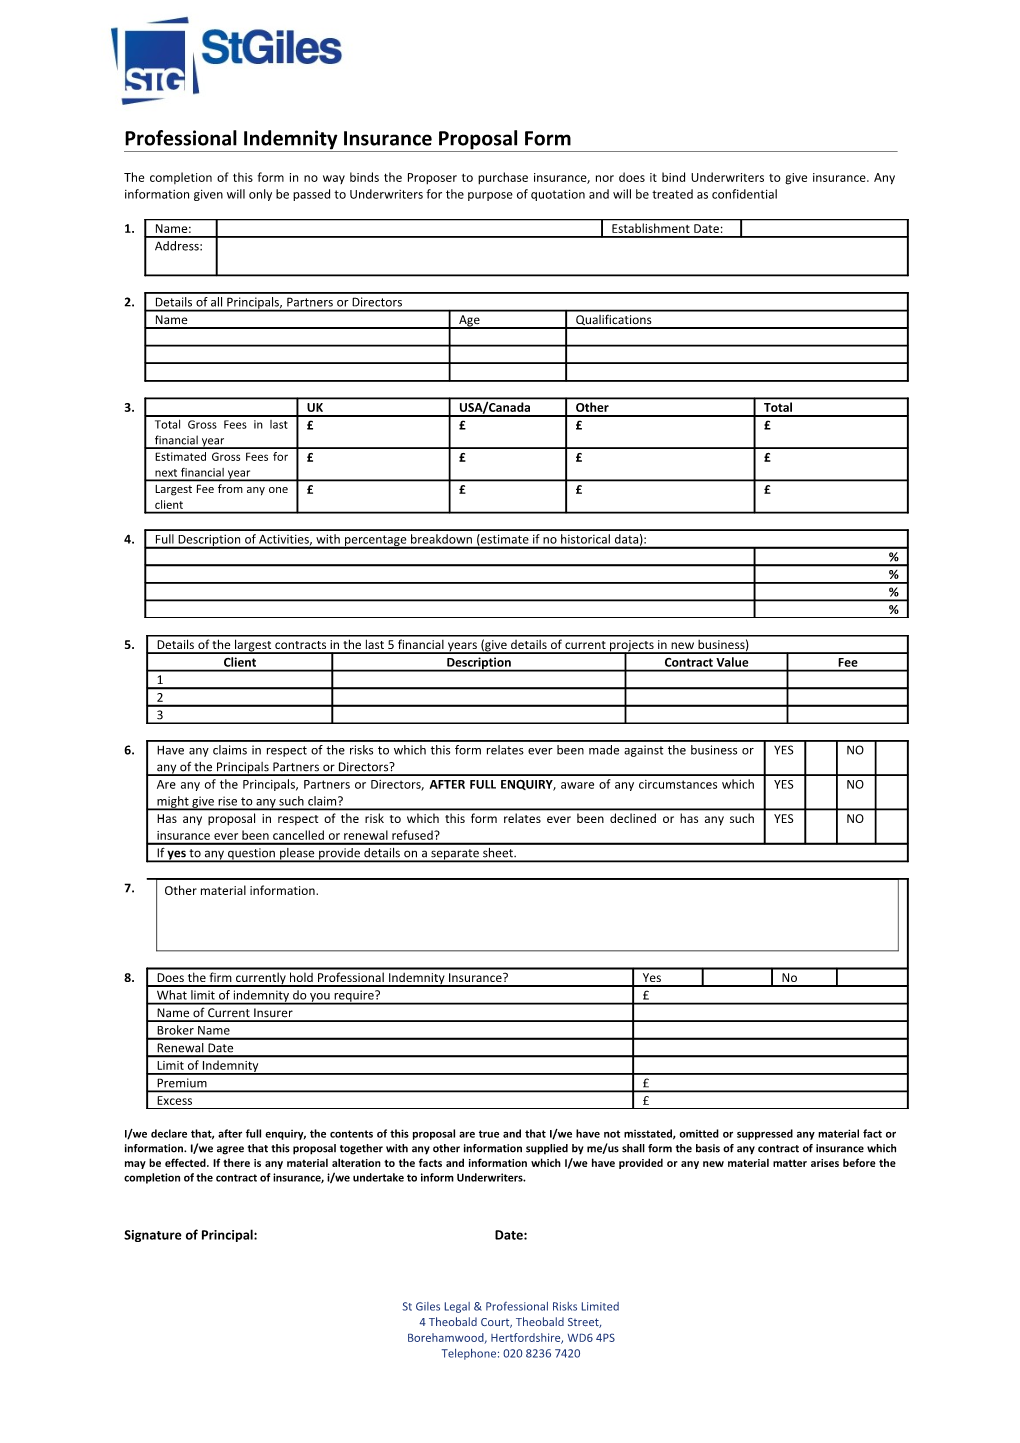 Professional Indemnity Insurance Proposal Form